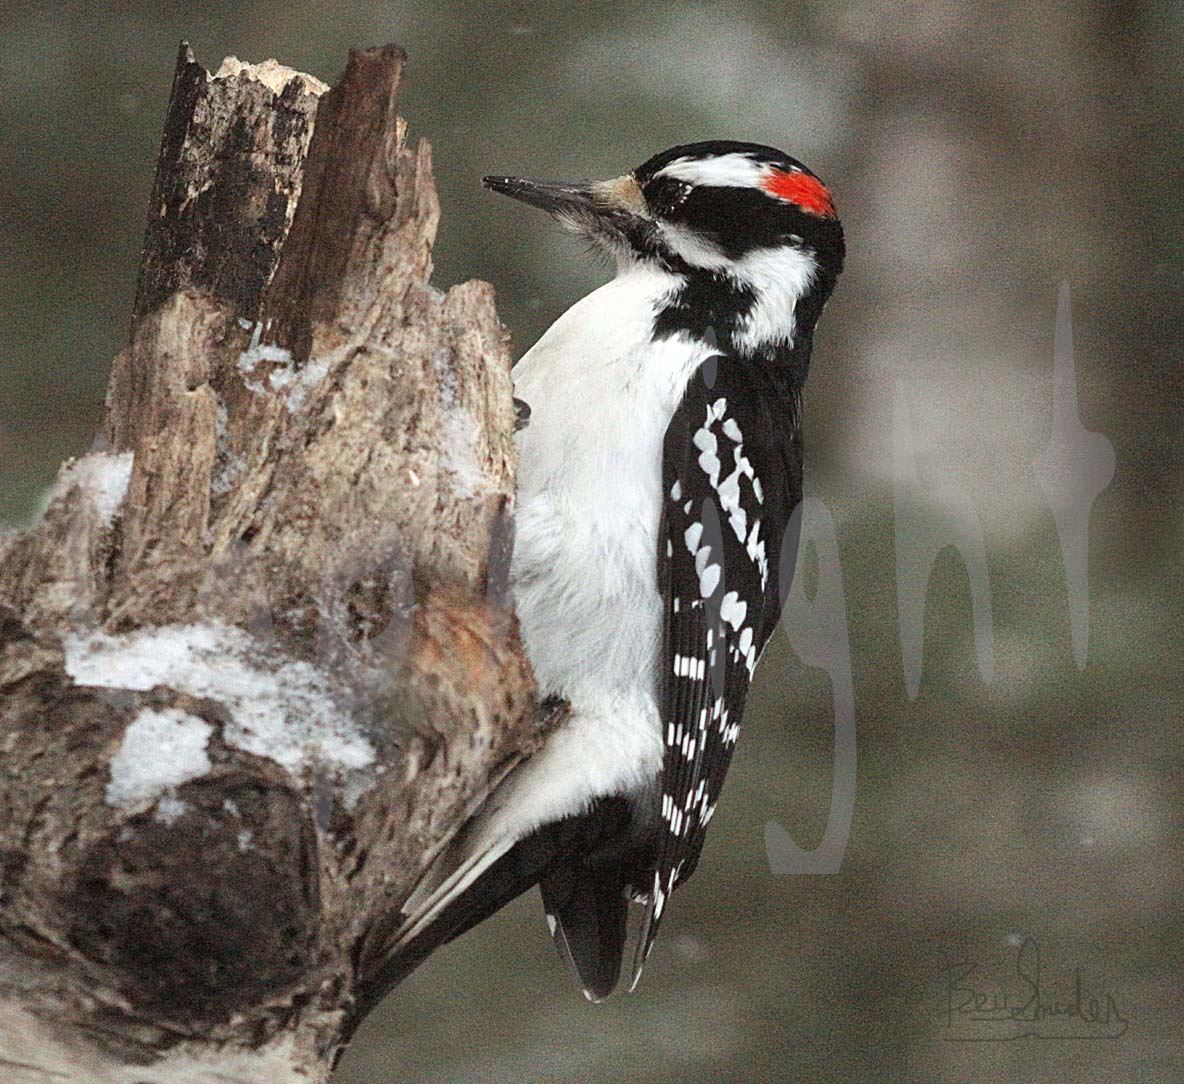 Male Hairy Woodpecker 2906 - A beautiful wild bright red headed male Hairy Woodpecker by Snookies Place of Wildlife and Nature